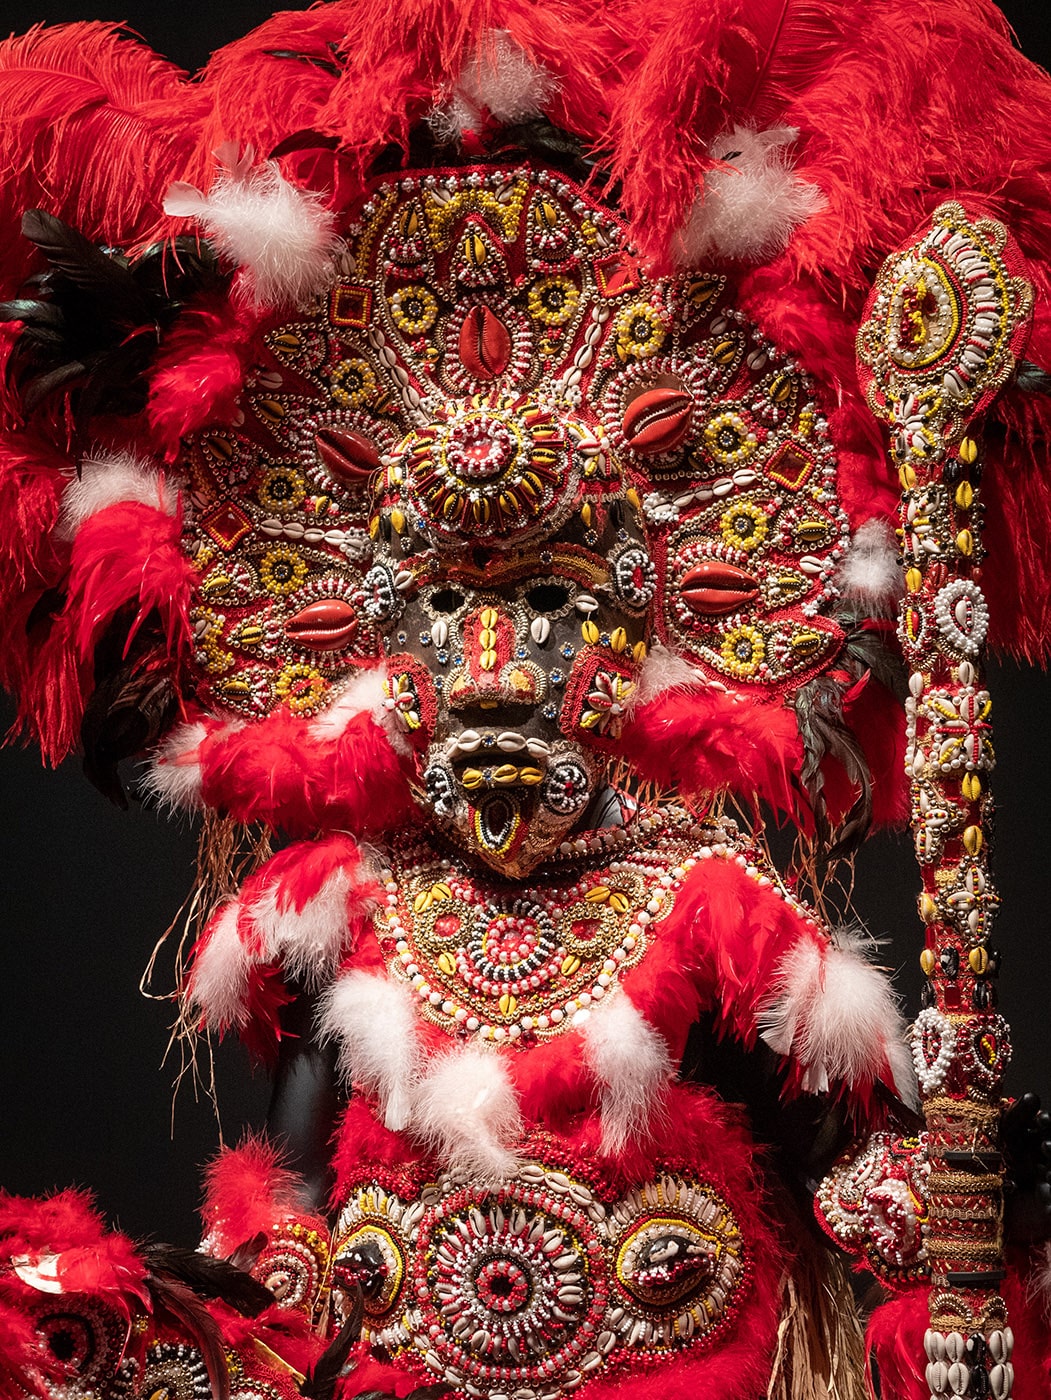 Black Indians at the Quai Branly-Jacques Chirac museum: the traditions of the New Orleans carnival 10